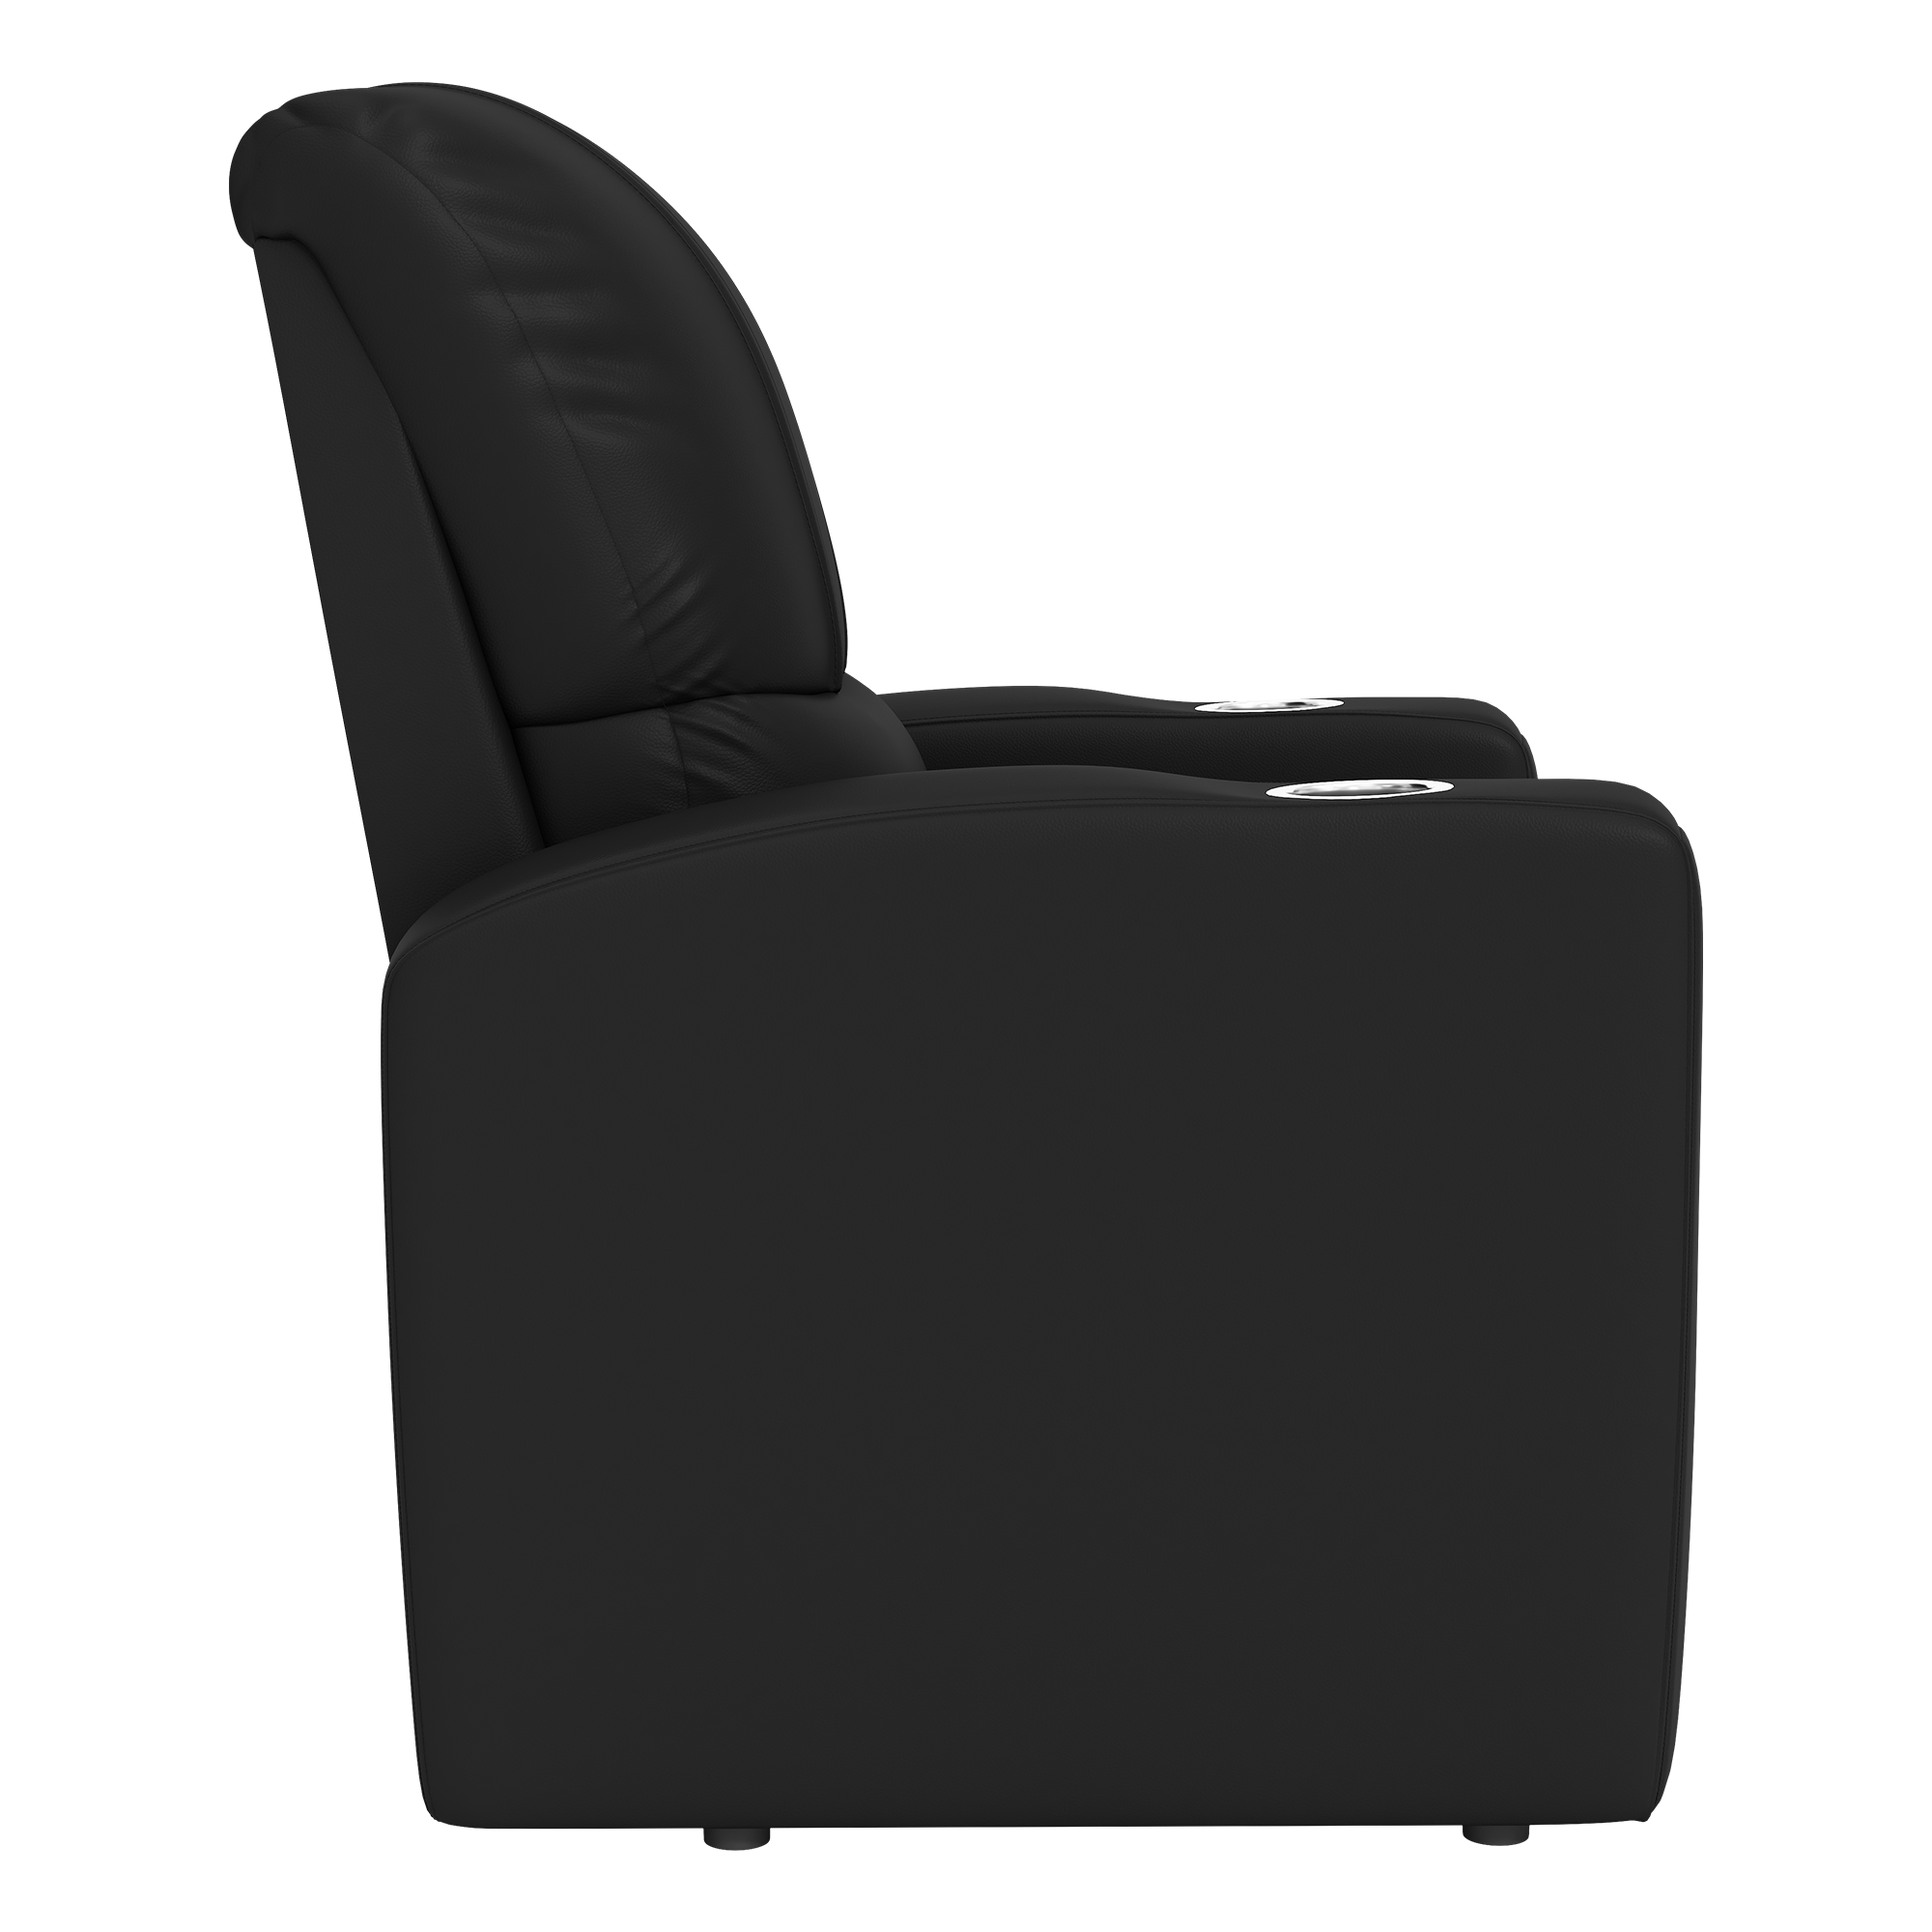 Stealth Recliner with Kansas City Royals Cooperstown